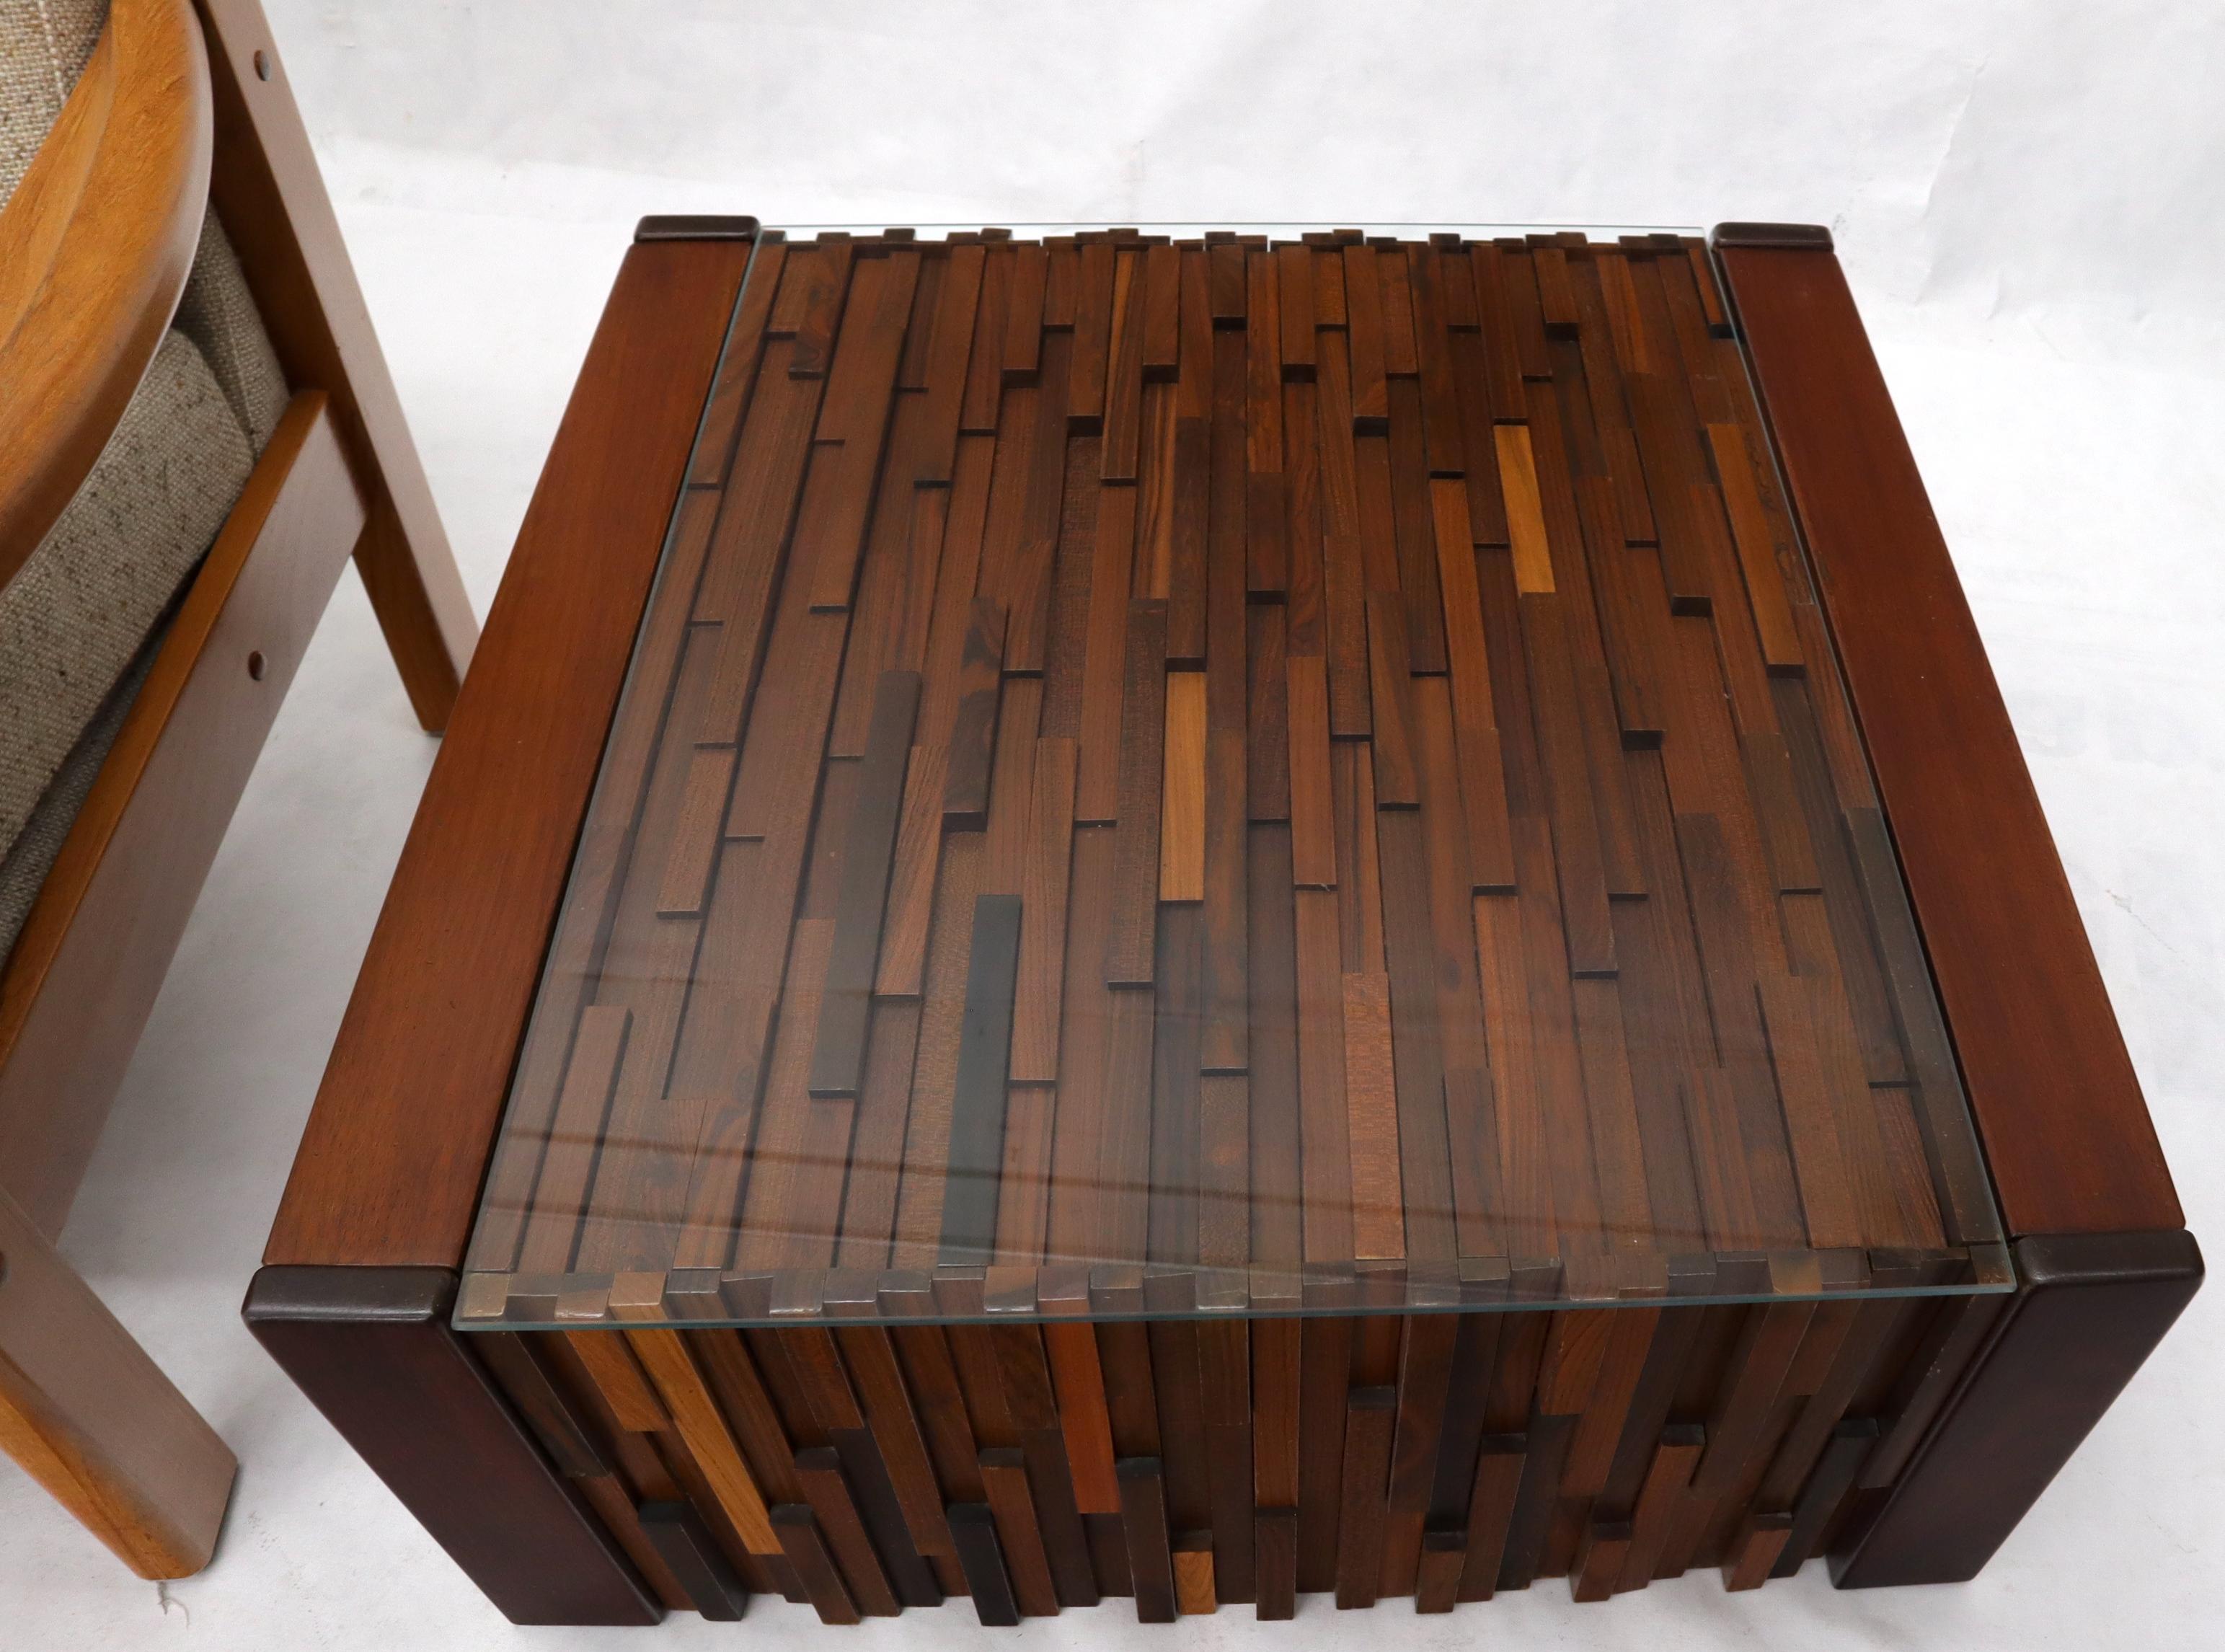 Pair of Percival Lafer Coffee Table Brazilian Rosewood Exotic Wood Mosaic In Good Condition For Sale In Rockaway, NJ